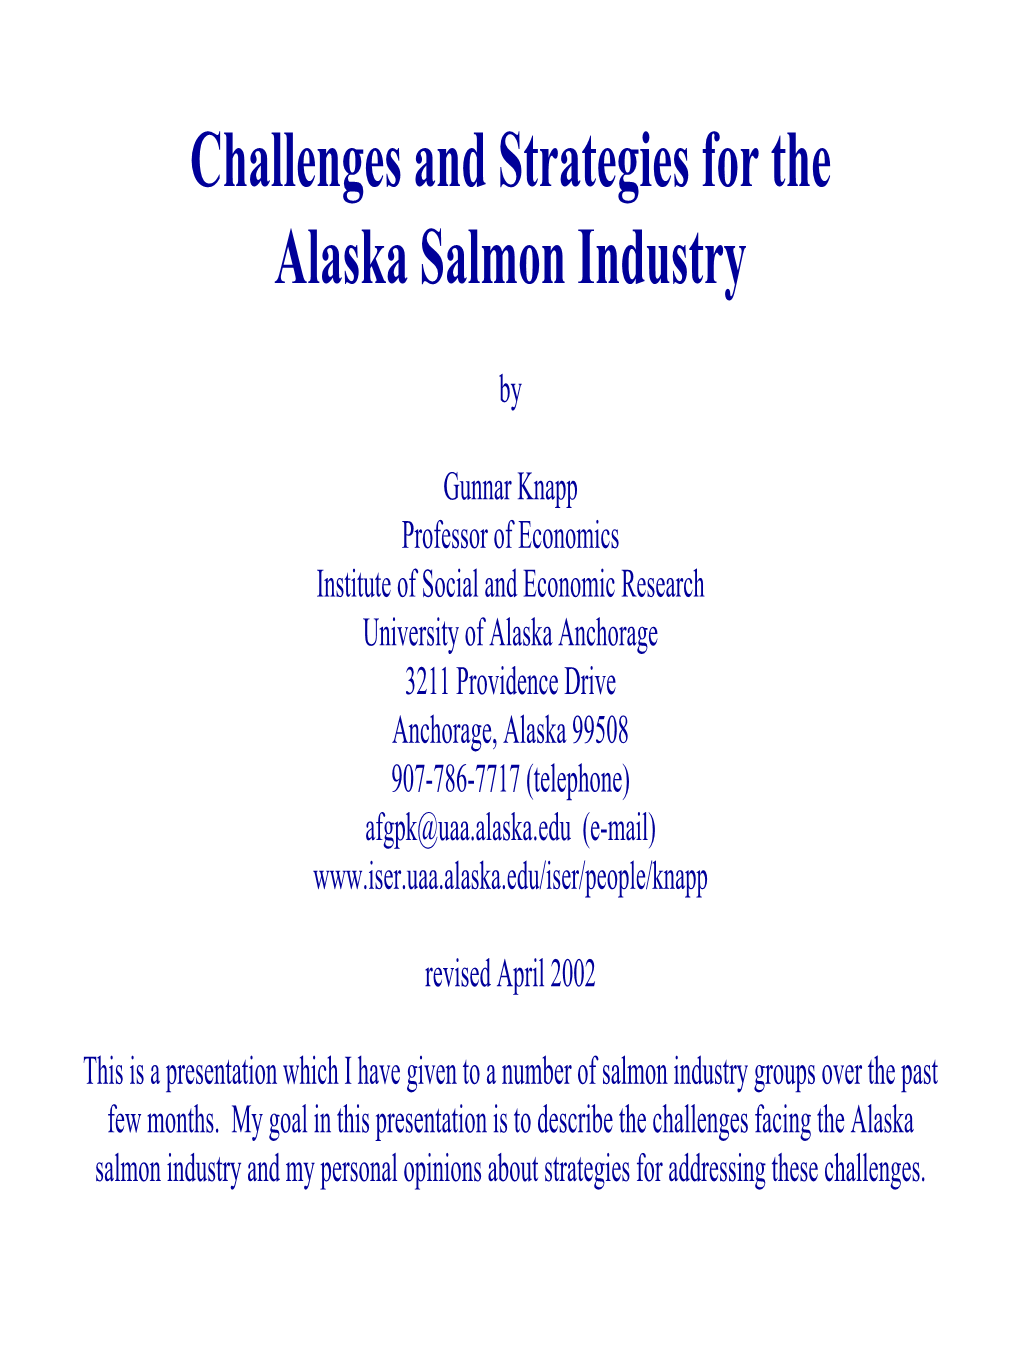 Challenges and Strategies for the Alaska Salmon Industry